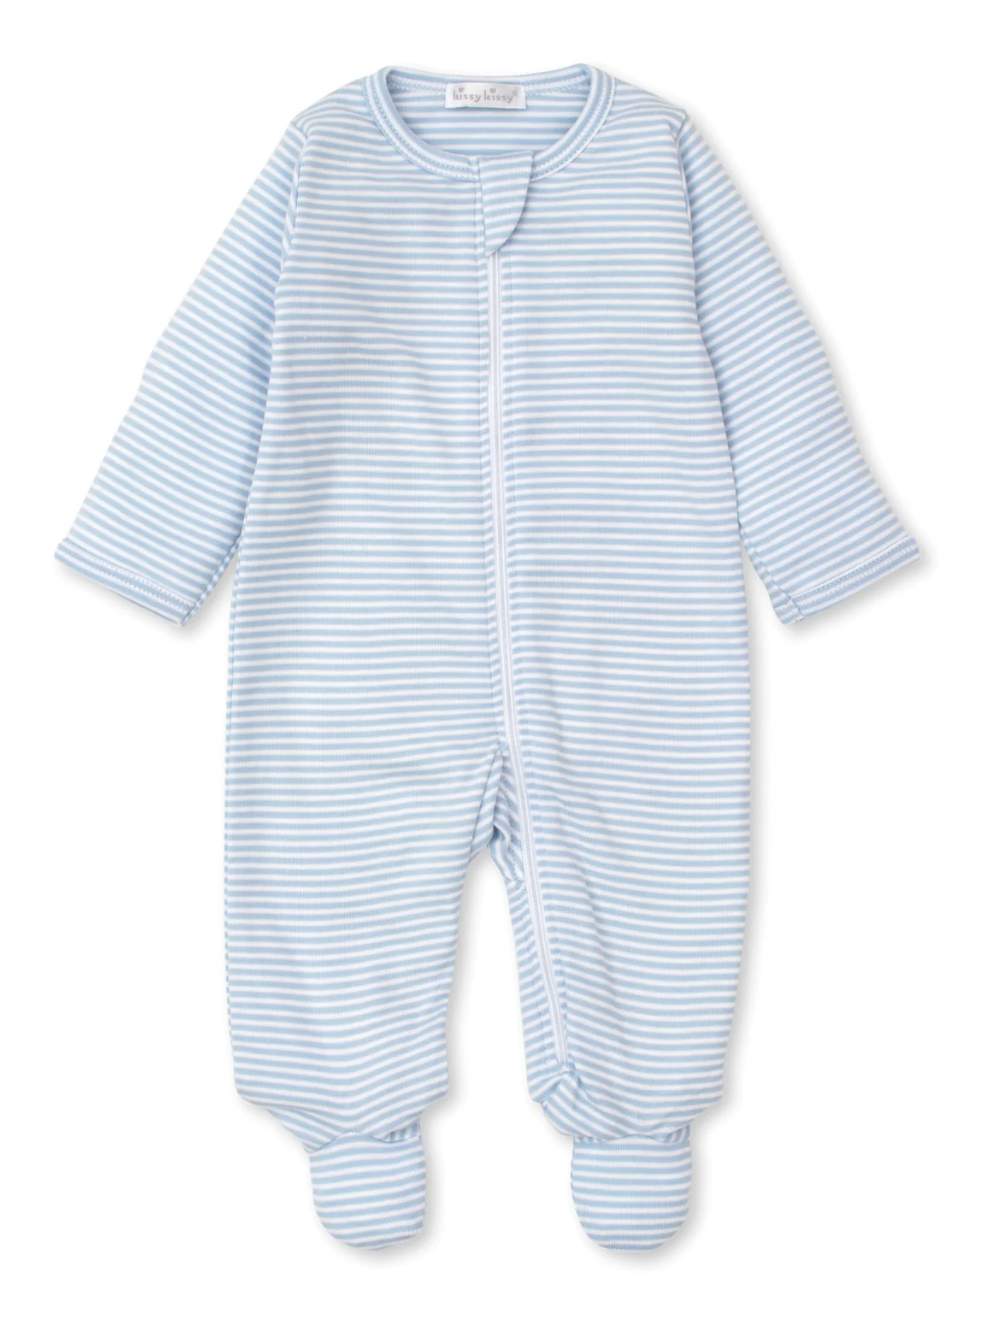 Striped Footie with Zipper- Blue